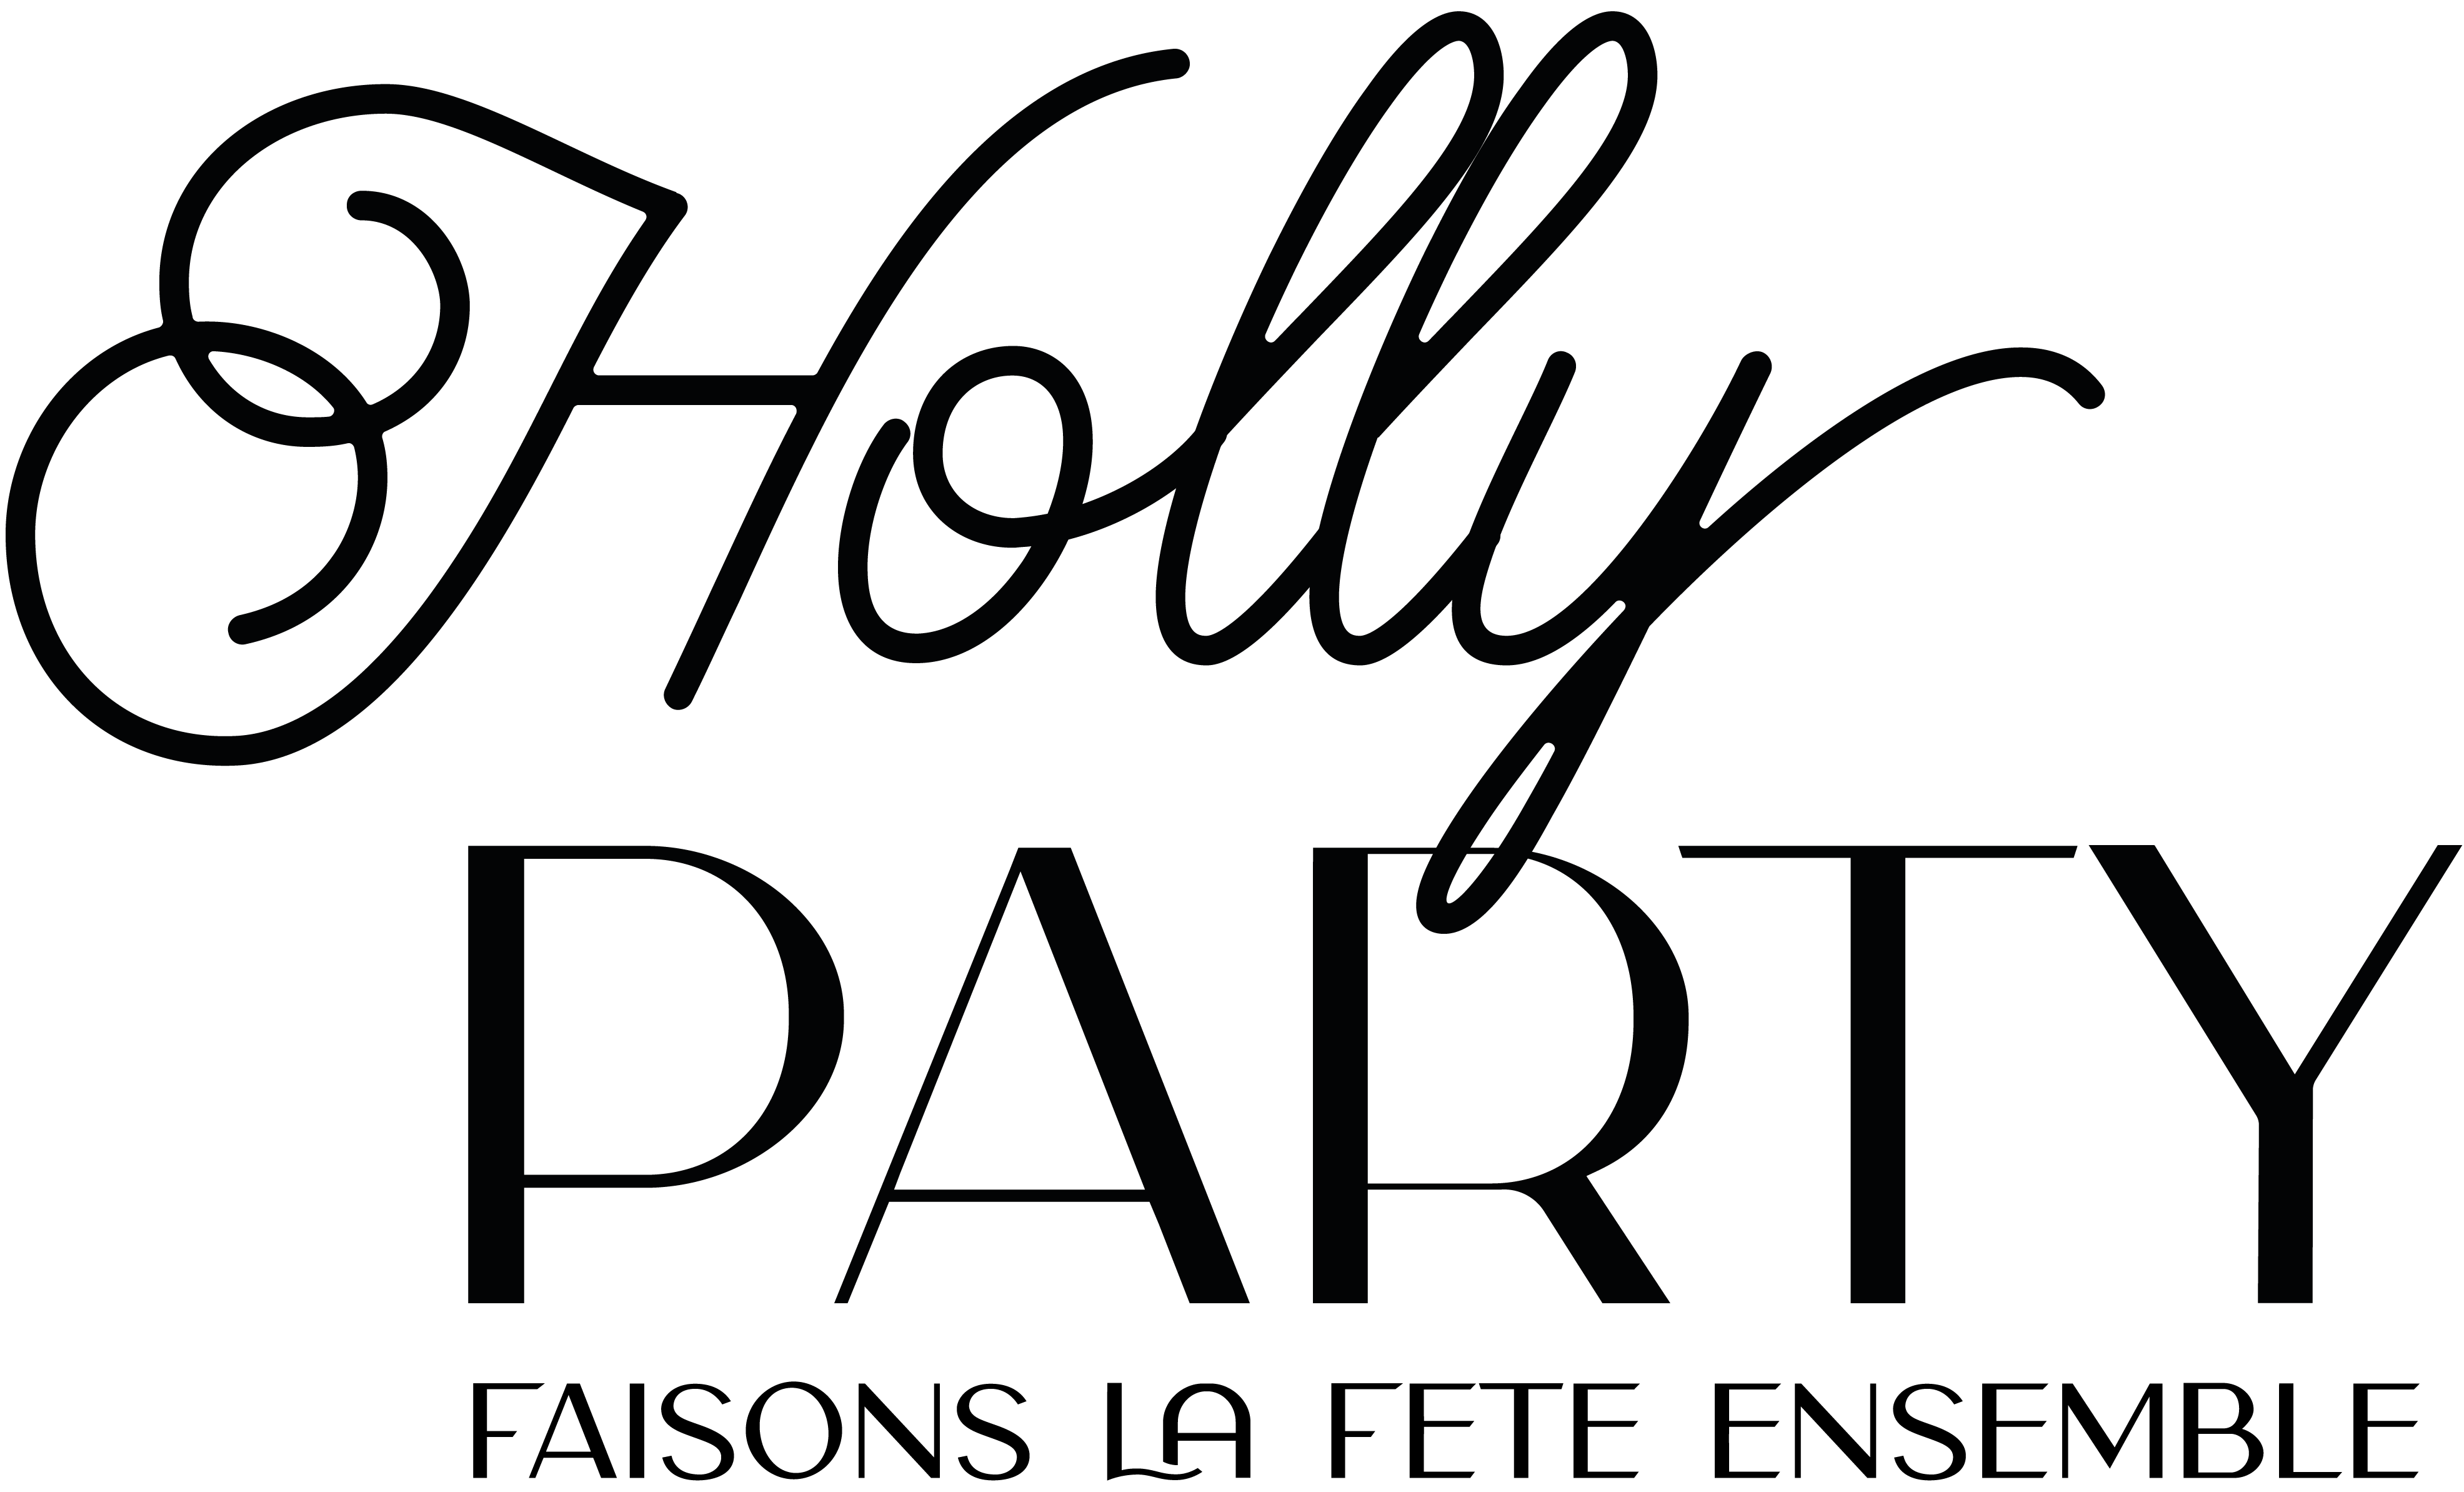 Holly Party